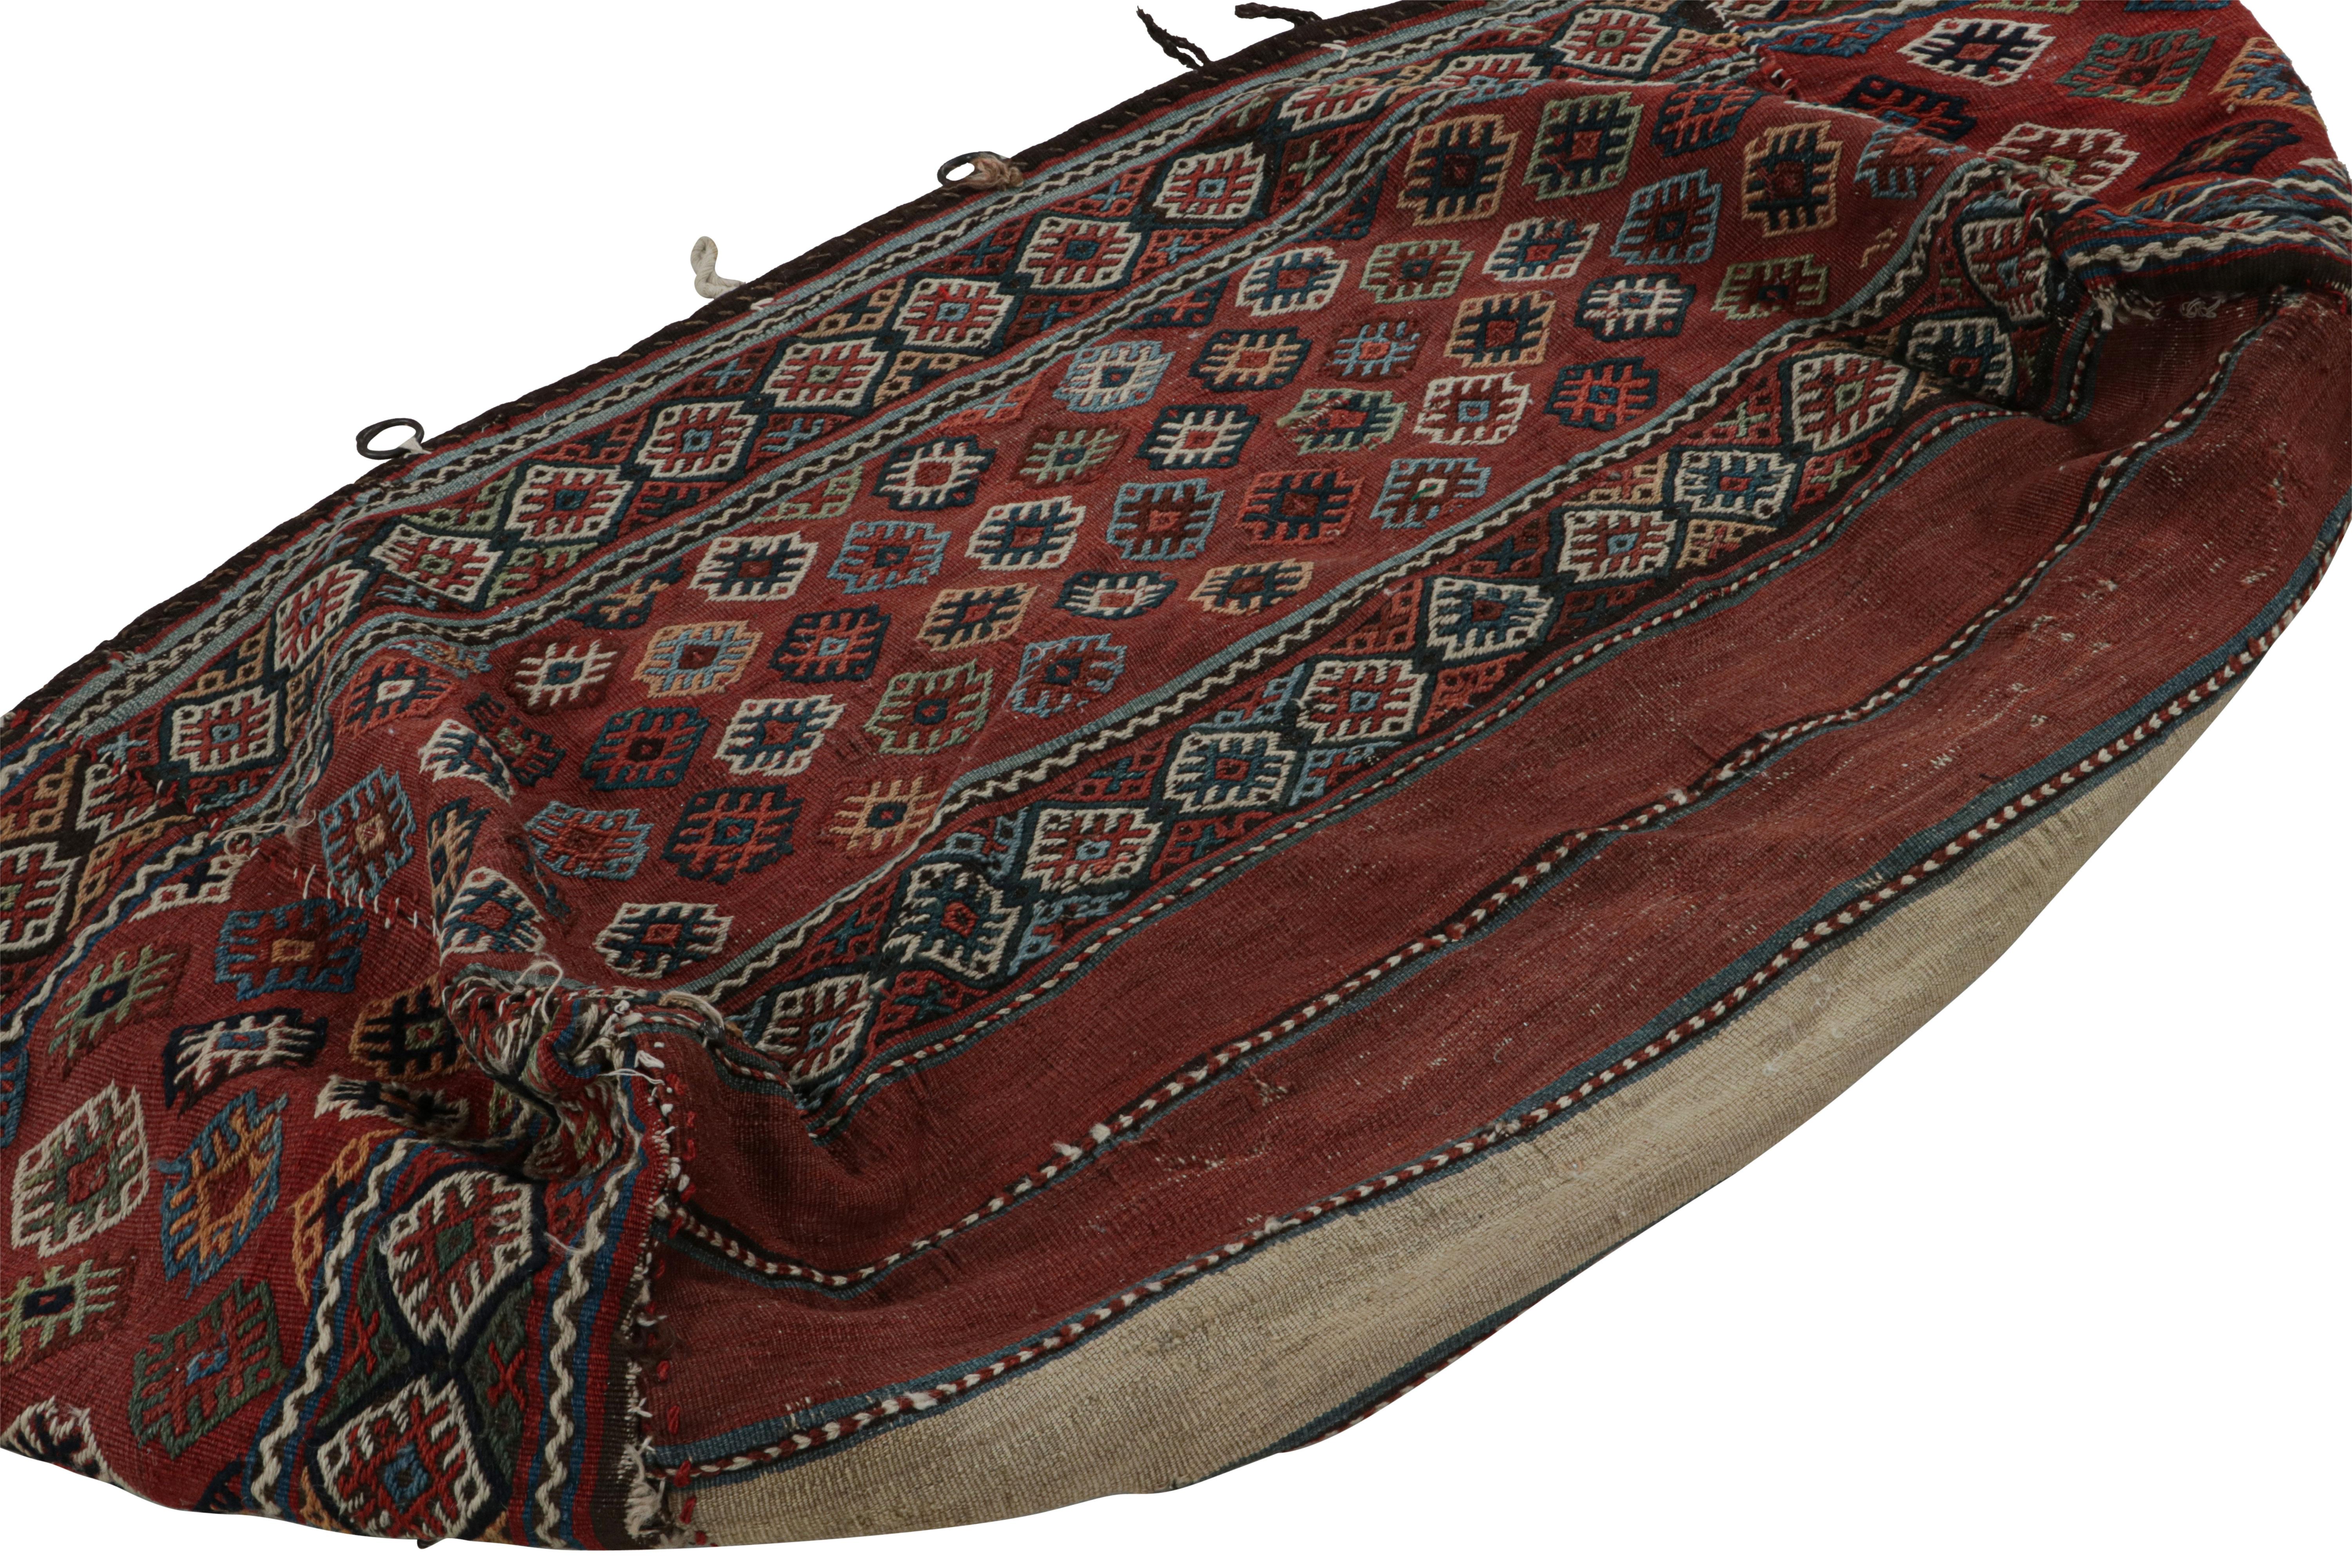 Handwoven in a wool flatweave in Turkey circa 1920-1930, this 2x5 piece is a bag once used in the daily lives of tribal and nomadic people.

On the Design: 

Drawing on Afghan tribal sensibilities, this archaic piece of art exhibiting an old-world